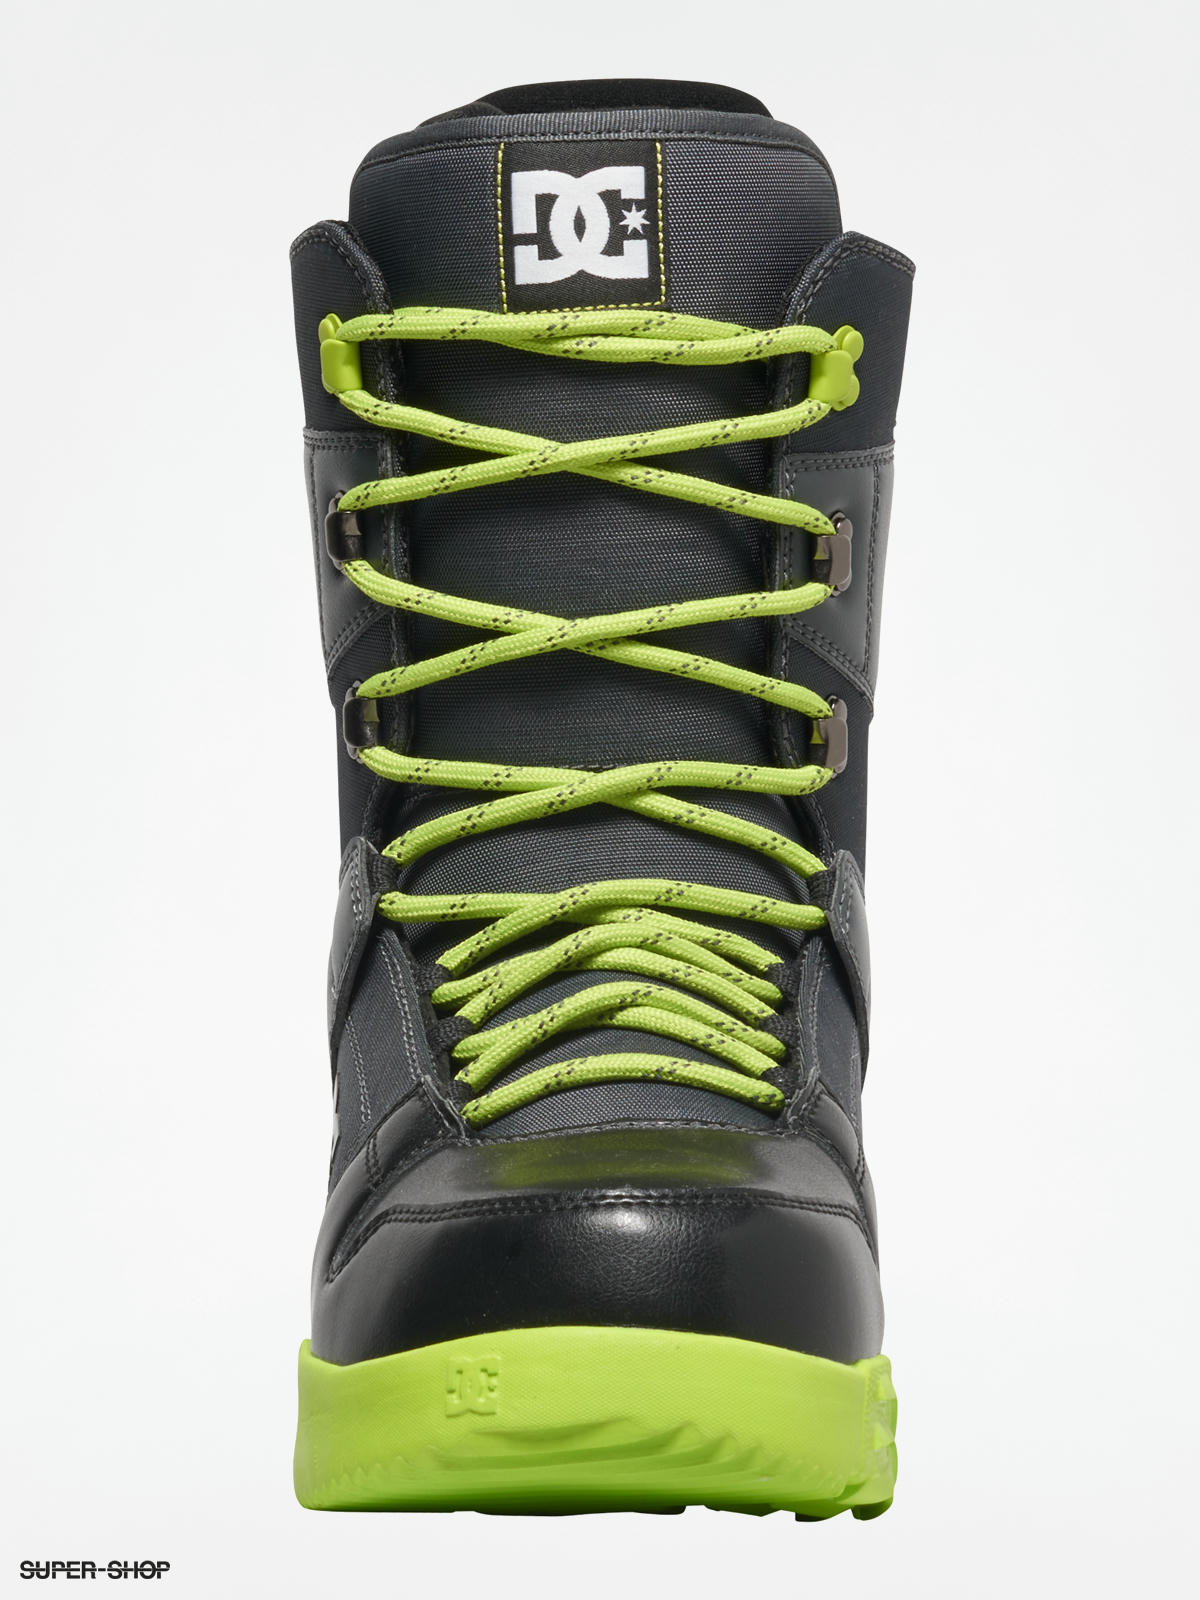 lime green snowboard boots